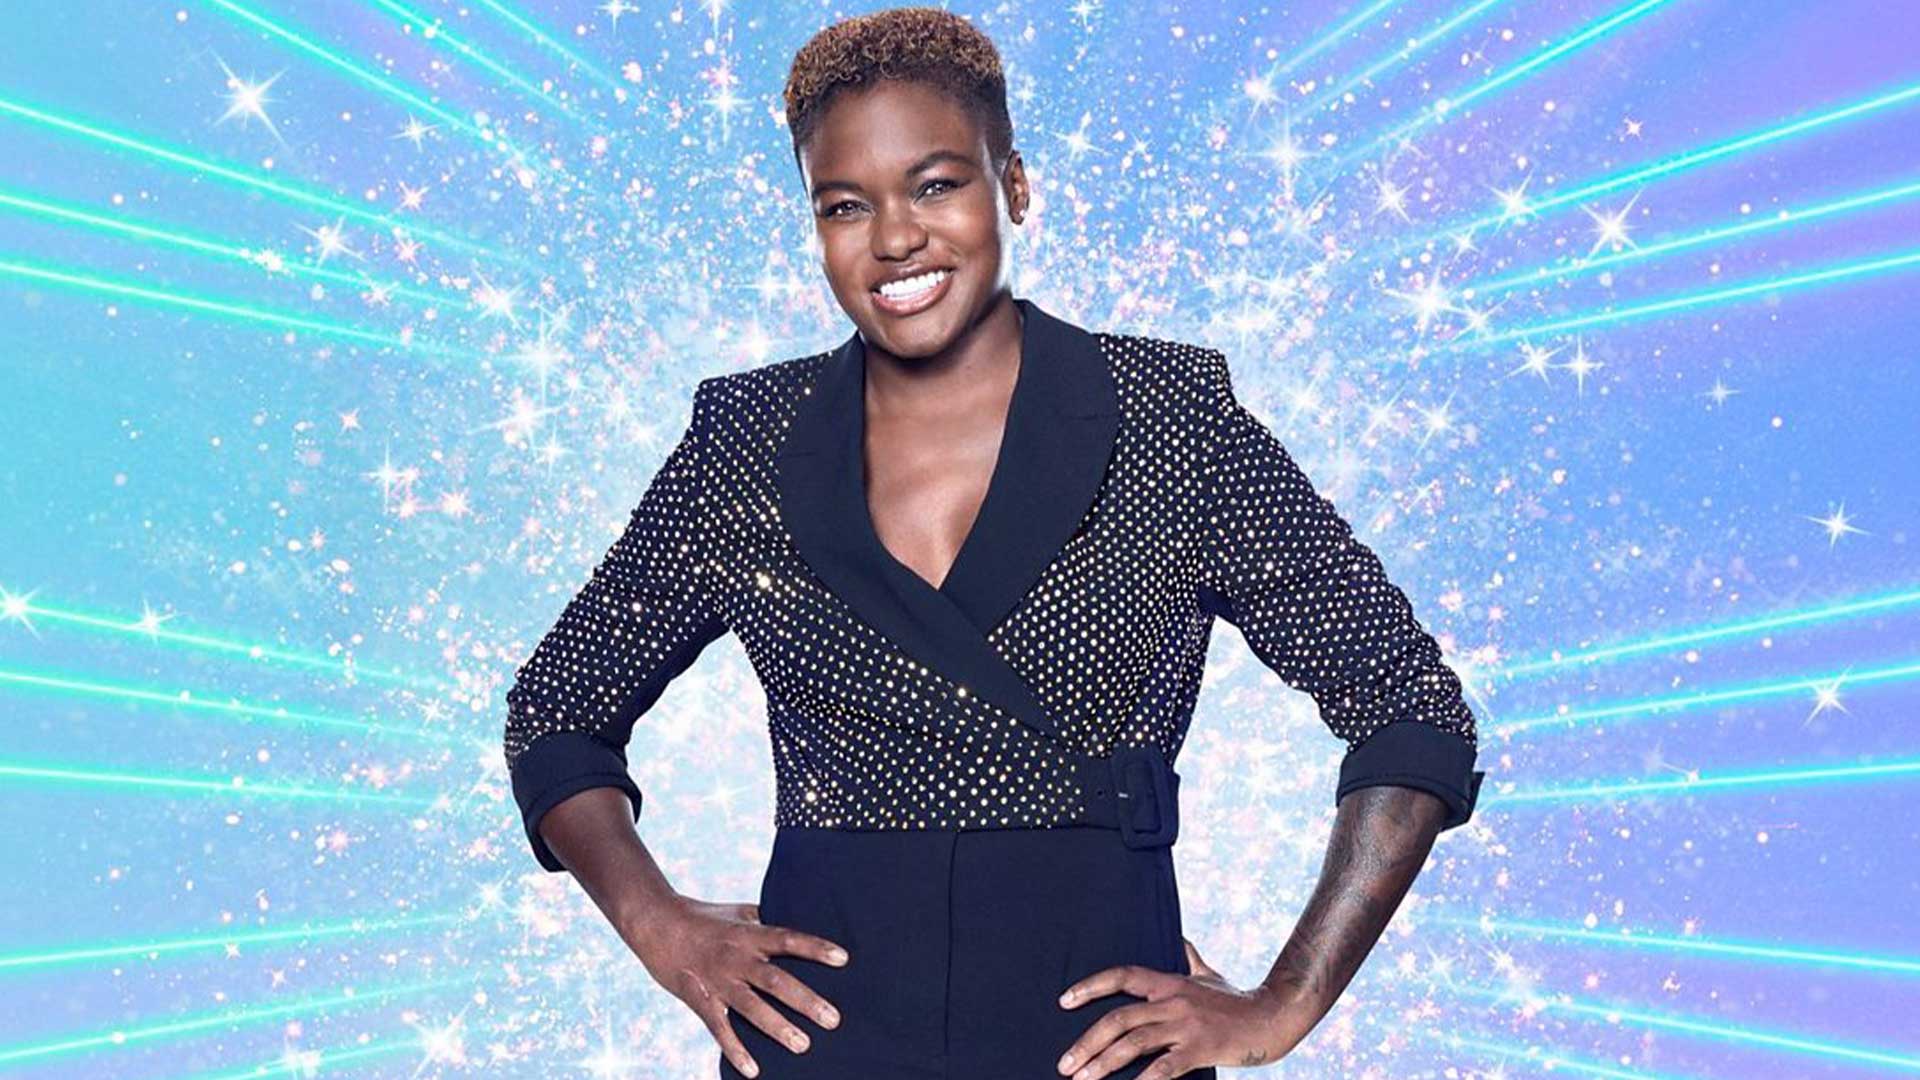 Nicola Adams on Strictly Come Dancing